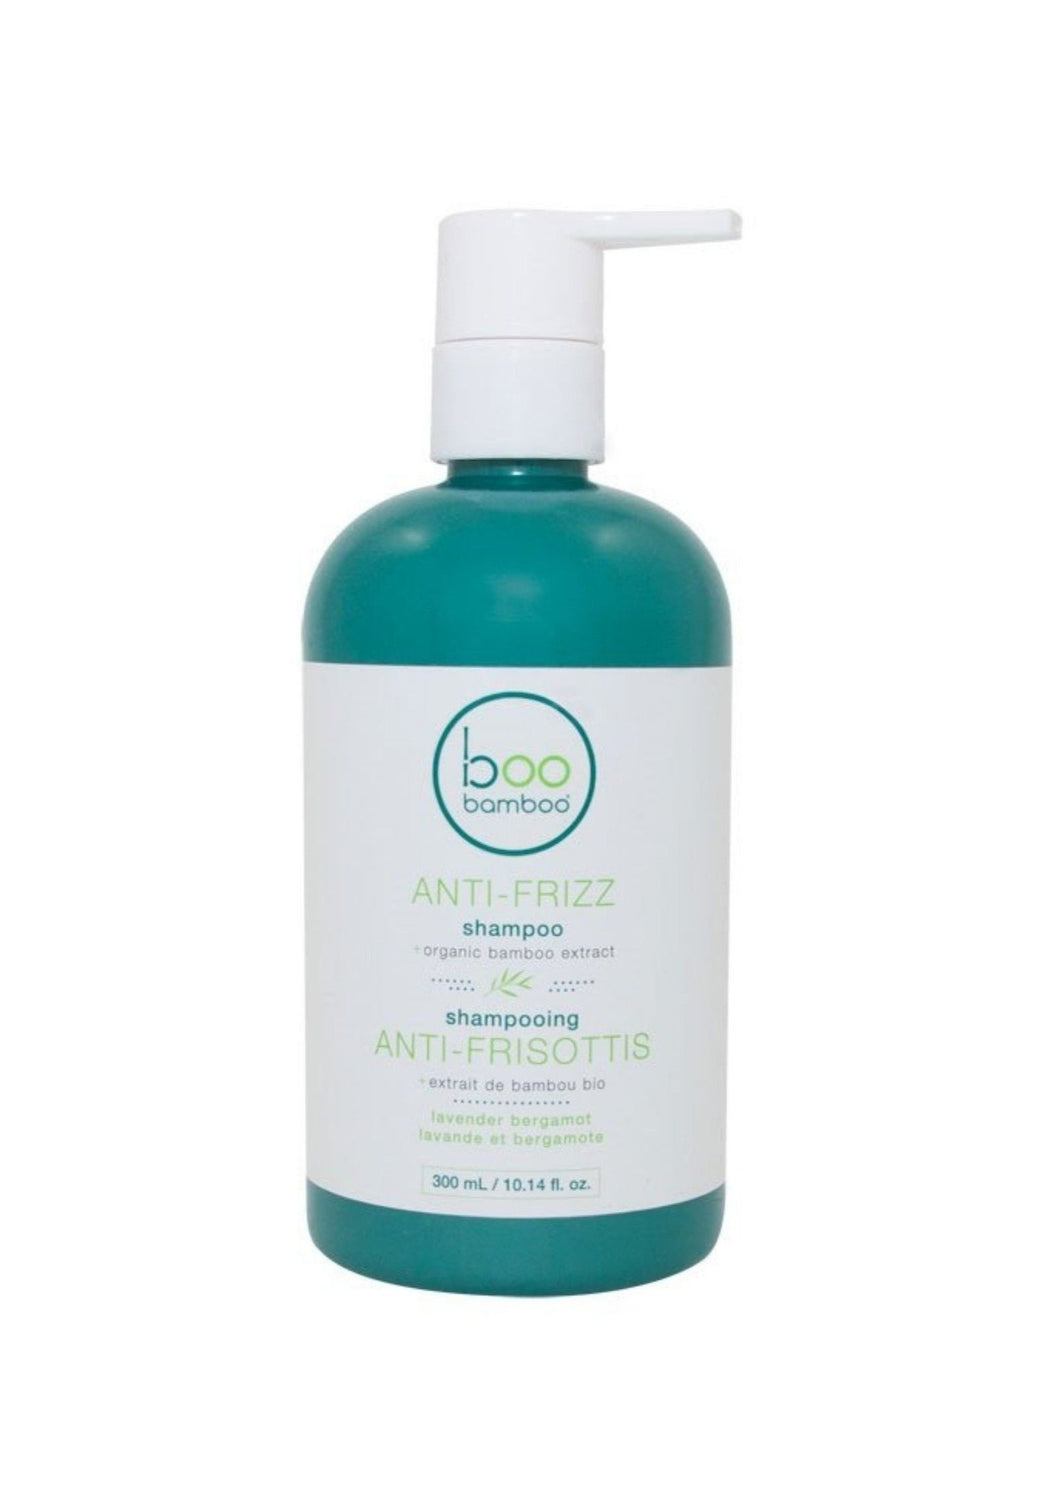 Frizzy or unruly hair be gone with boo bamboo Anti-Frizz Shampoo! Infused with natural oils, bamboo and algae extracts, boo bamboo's lavender fragranced shampoo builds a barrier around hair to reduce frizz and tame unmanageable and fly-away hair. 300ml $13.00